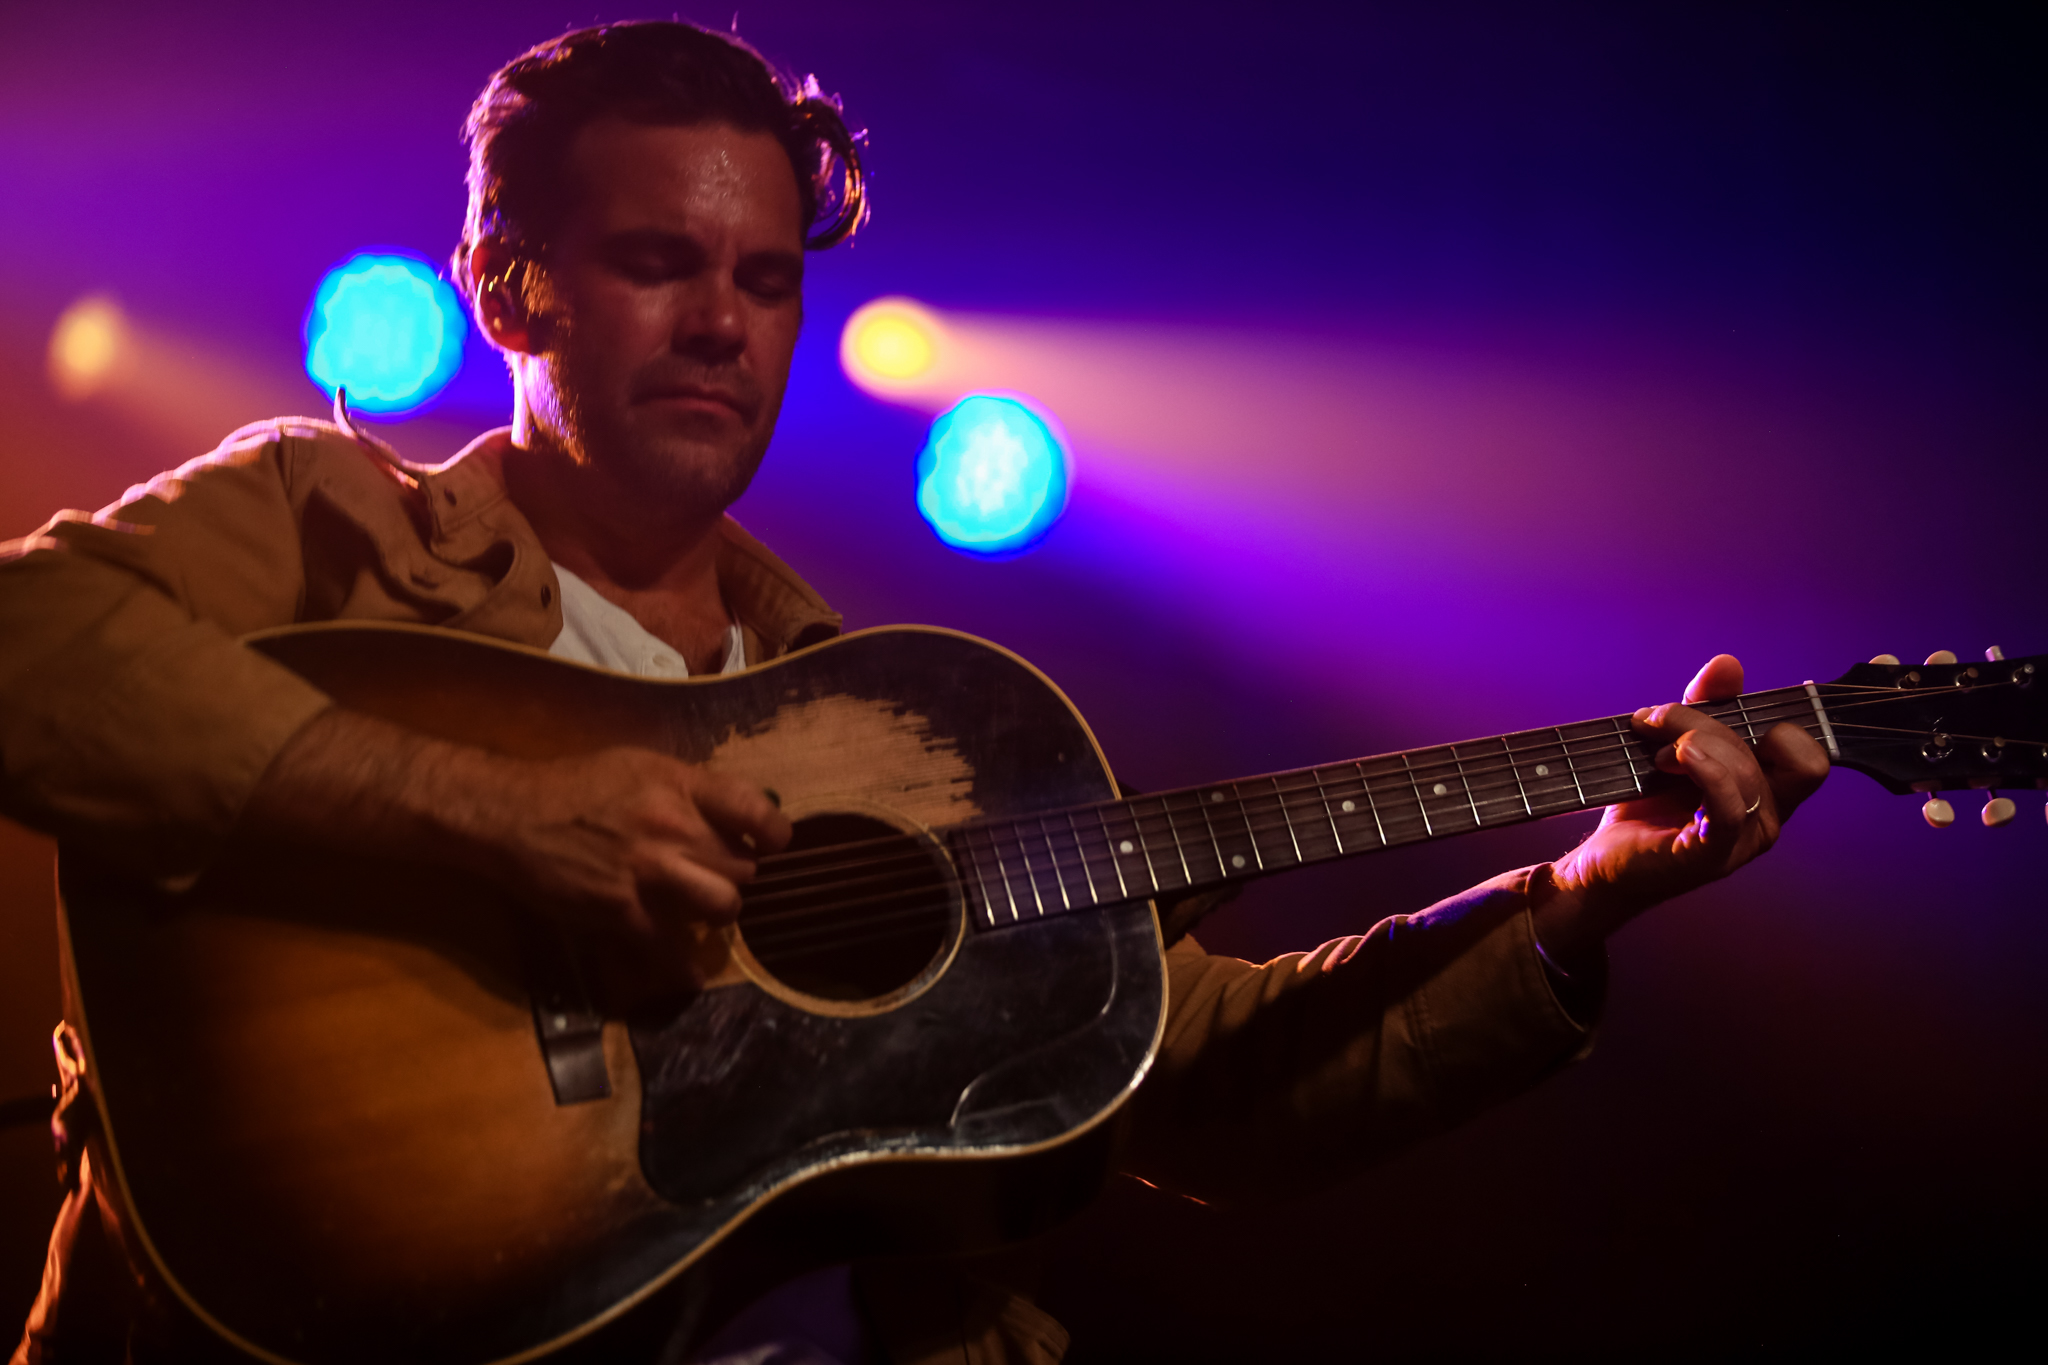 The Lone Bellow perform a show at the Orange Peel in Asheville, NC.